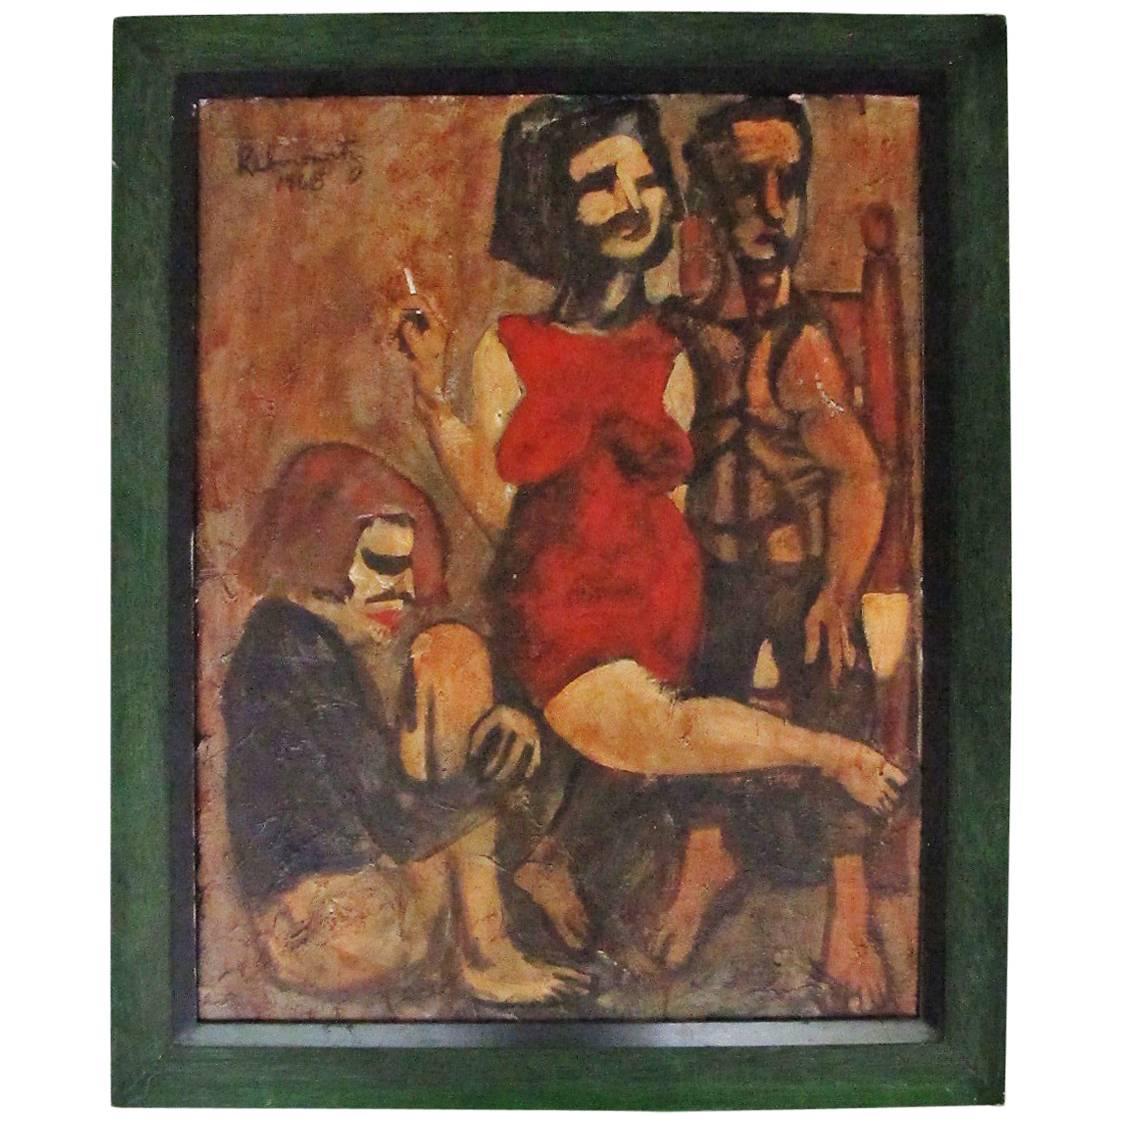 Existential Beatnik Oil Painting Signed "Rabinowitz 1968" For Sale